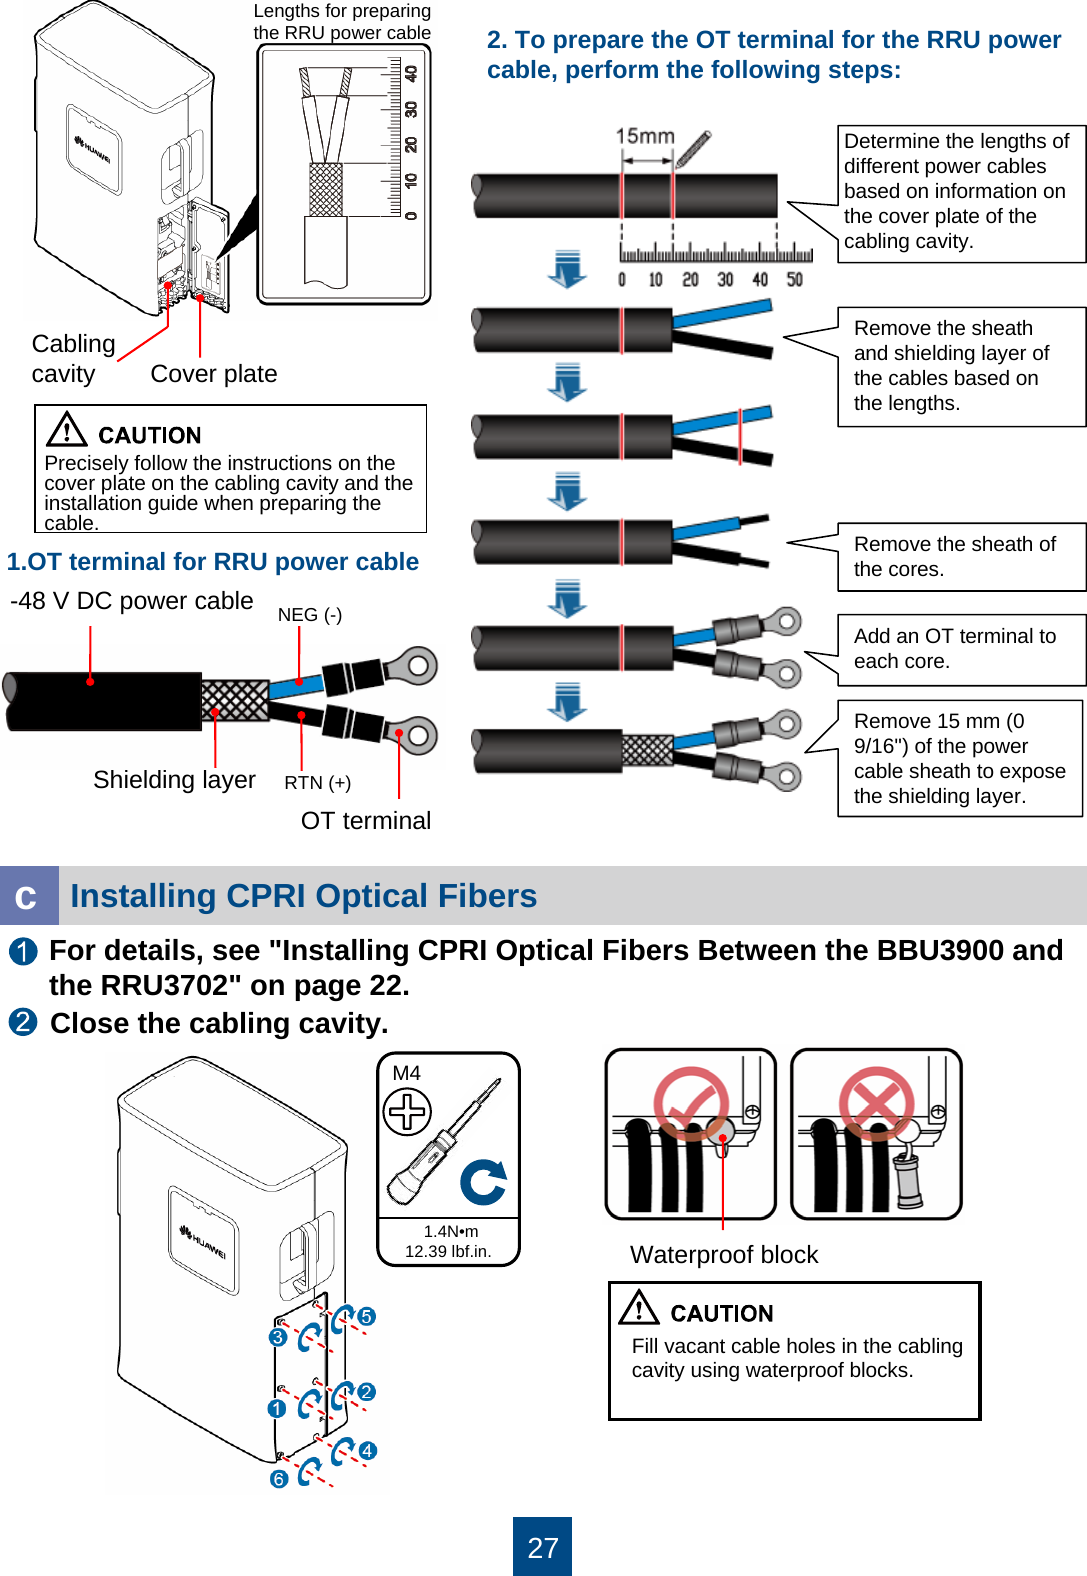 271.4N•m12.39 lbf.in.M4Fill vacant cable holes in the cabling cavity using waterproof blocks.Installing CPRI Optical FibersFor details, see &quot;Installing CPRI Optical Fibers Between the BBU3900 and the RRU3702&quot; on page 22.cClose the cabling cavity.Precisely follow the instructions on the cover plate on the cabling cavity and the installation guide when preparing the cable. Cover plateCabling cavityShielding layerRemove the sheath and shielding layer of the cables based on the lengths.Remove the sheath of the cores.Add an OT terminal to each core.Remove 15 mm (0 9/16&apos;&apos;) of the power cable sheath to expose the shielding layer.1.OT terminal for RRU power cableLengths for preparing the RRU power cableNEG (-)RTN (+)-48 V DC power cableOT terminal2. To prepare the OT terminal for the RRU power cable, perform the following steps:Determine the lengths of different power cables based on information on the cover plate of the cabling cavity.Waterproof block